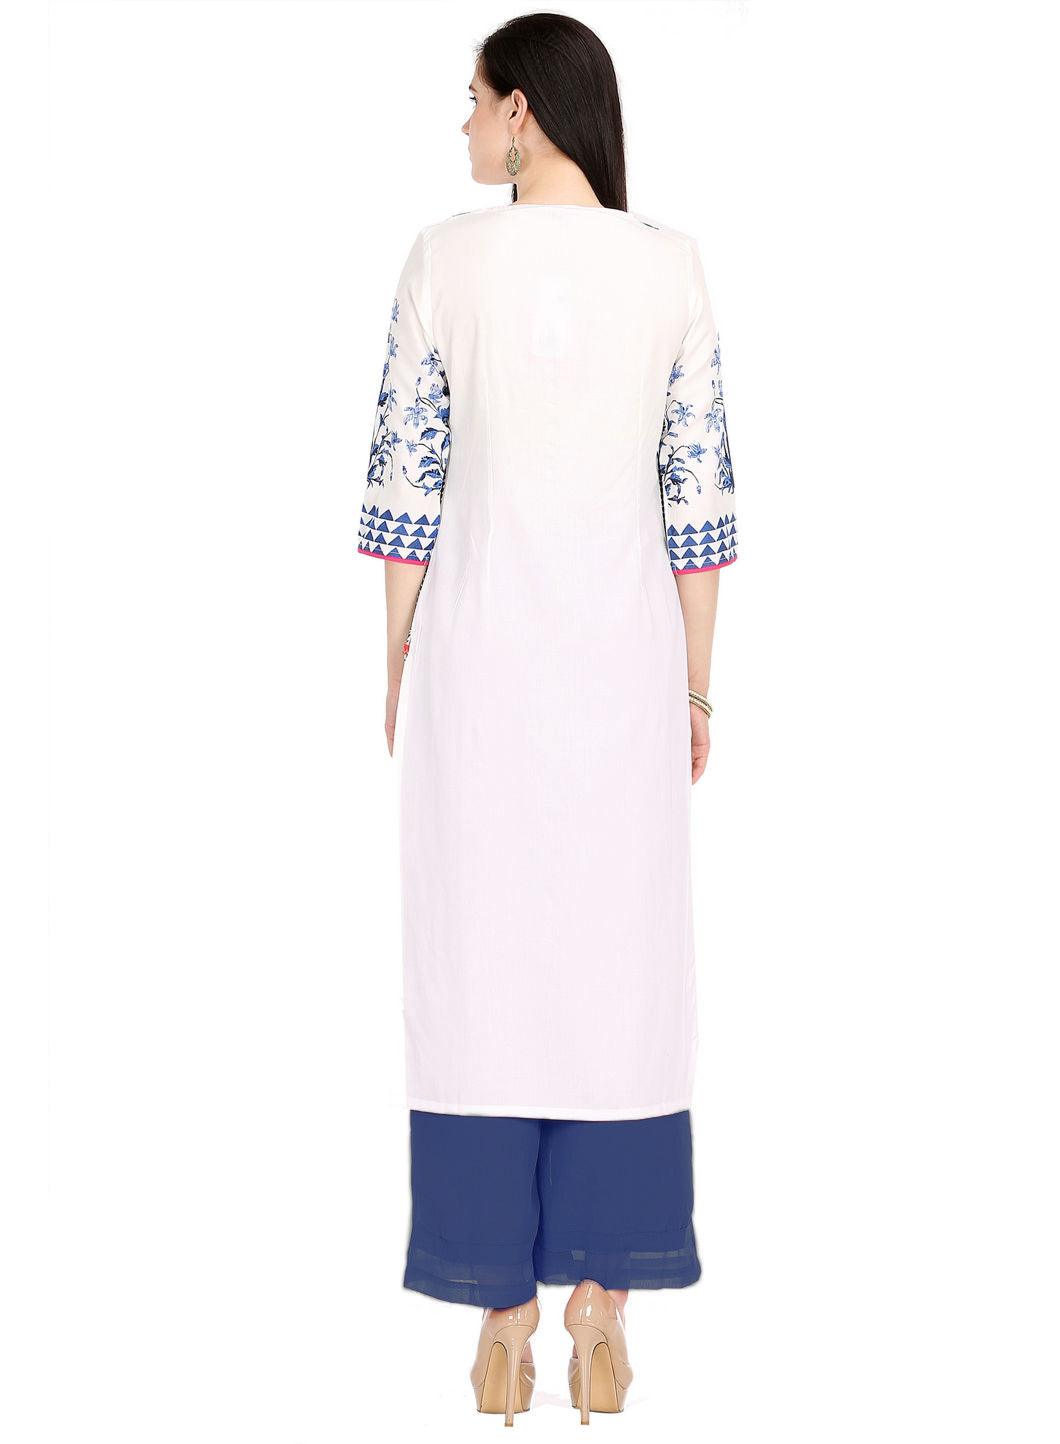 Wonderful White Color Printed Long Casual Kurti by Qivii